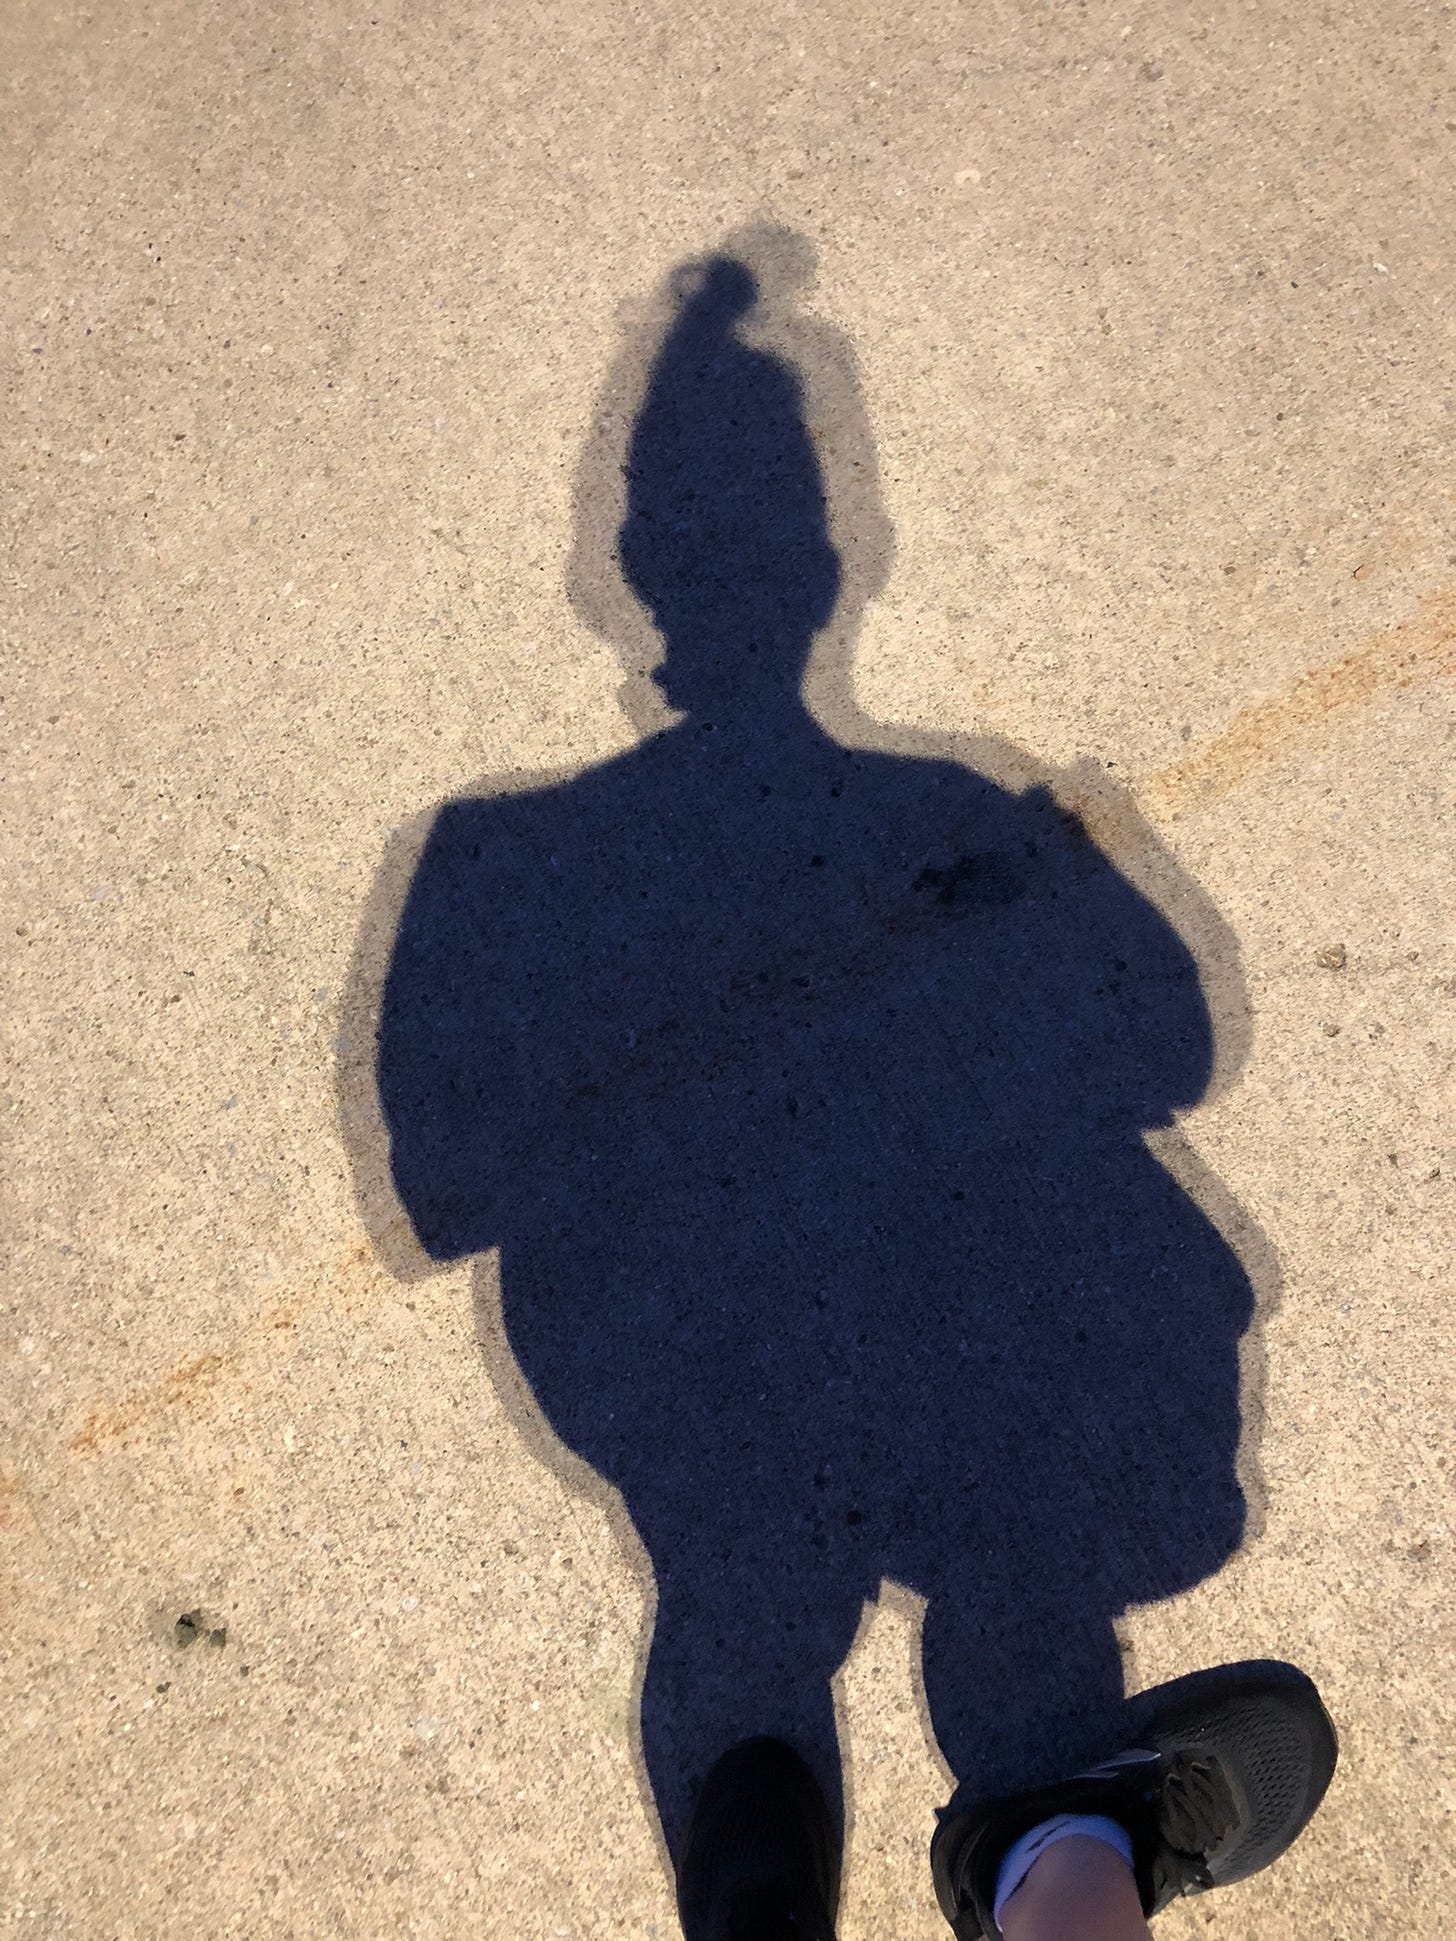 the shadow of a person cast on concrete with the appearance of doubling